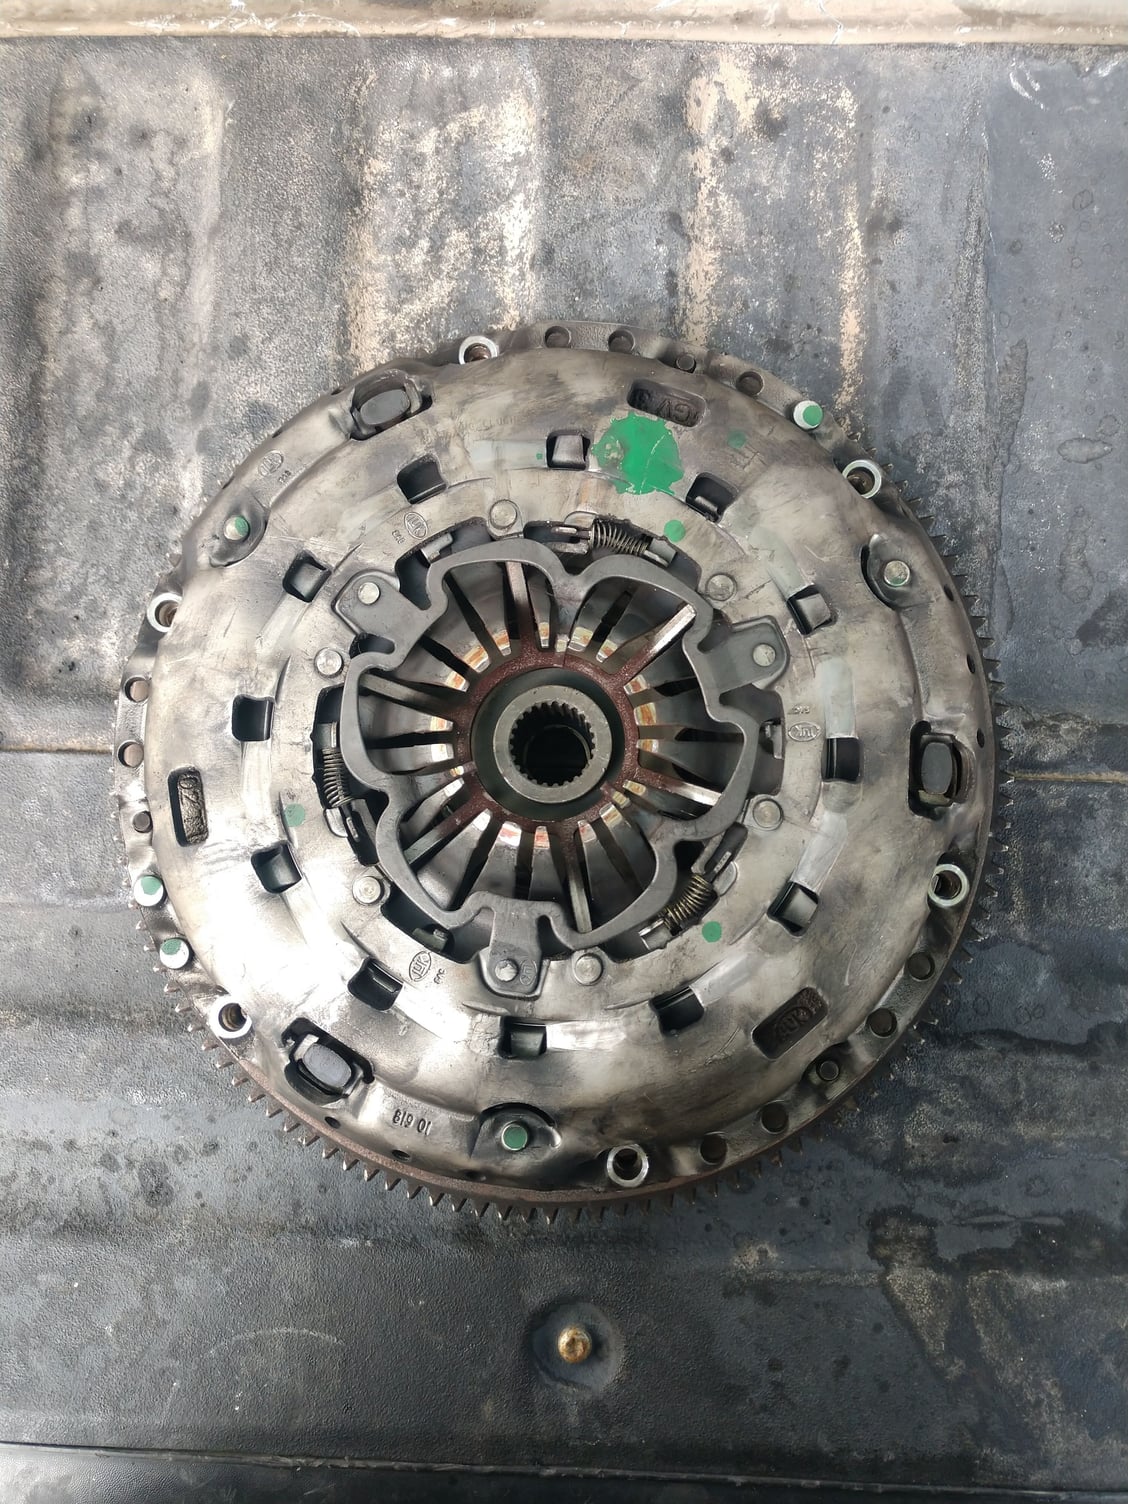 Drivetrain - SOLD: luk clutch, pressure plate, and flywheel - Used - 2004 to 2006 Acura TL - Brownsville, TX 78520, United States